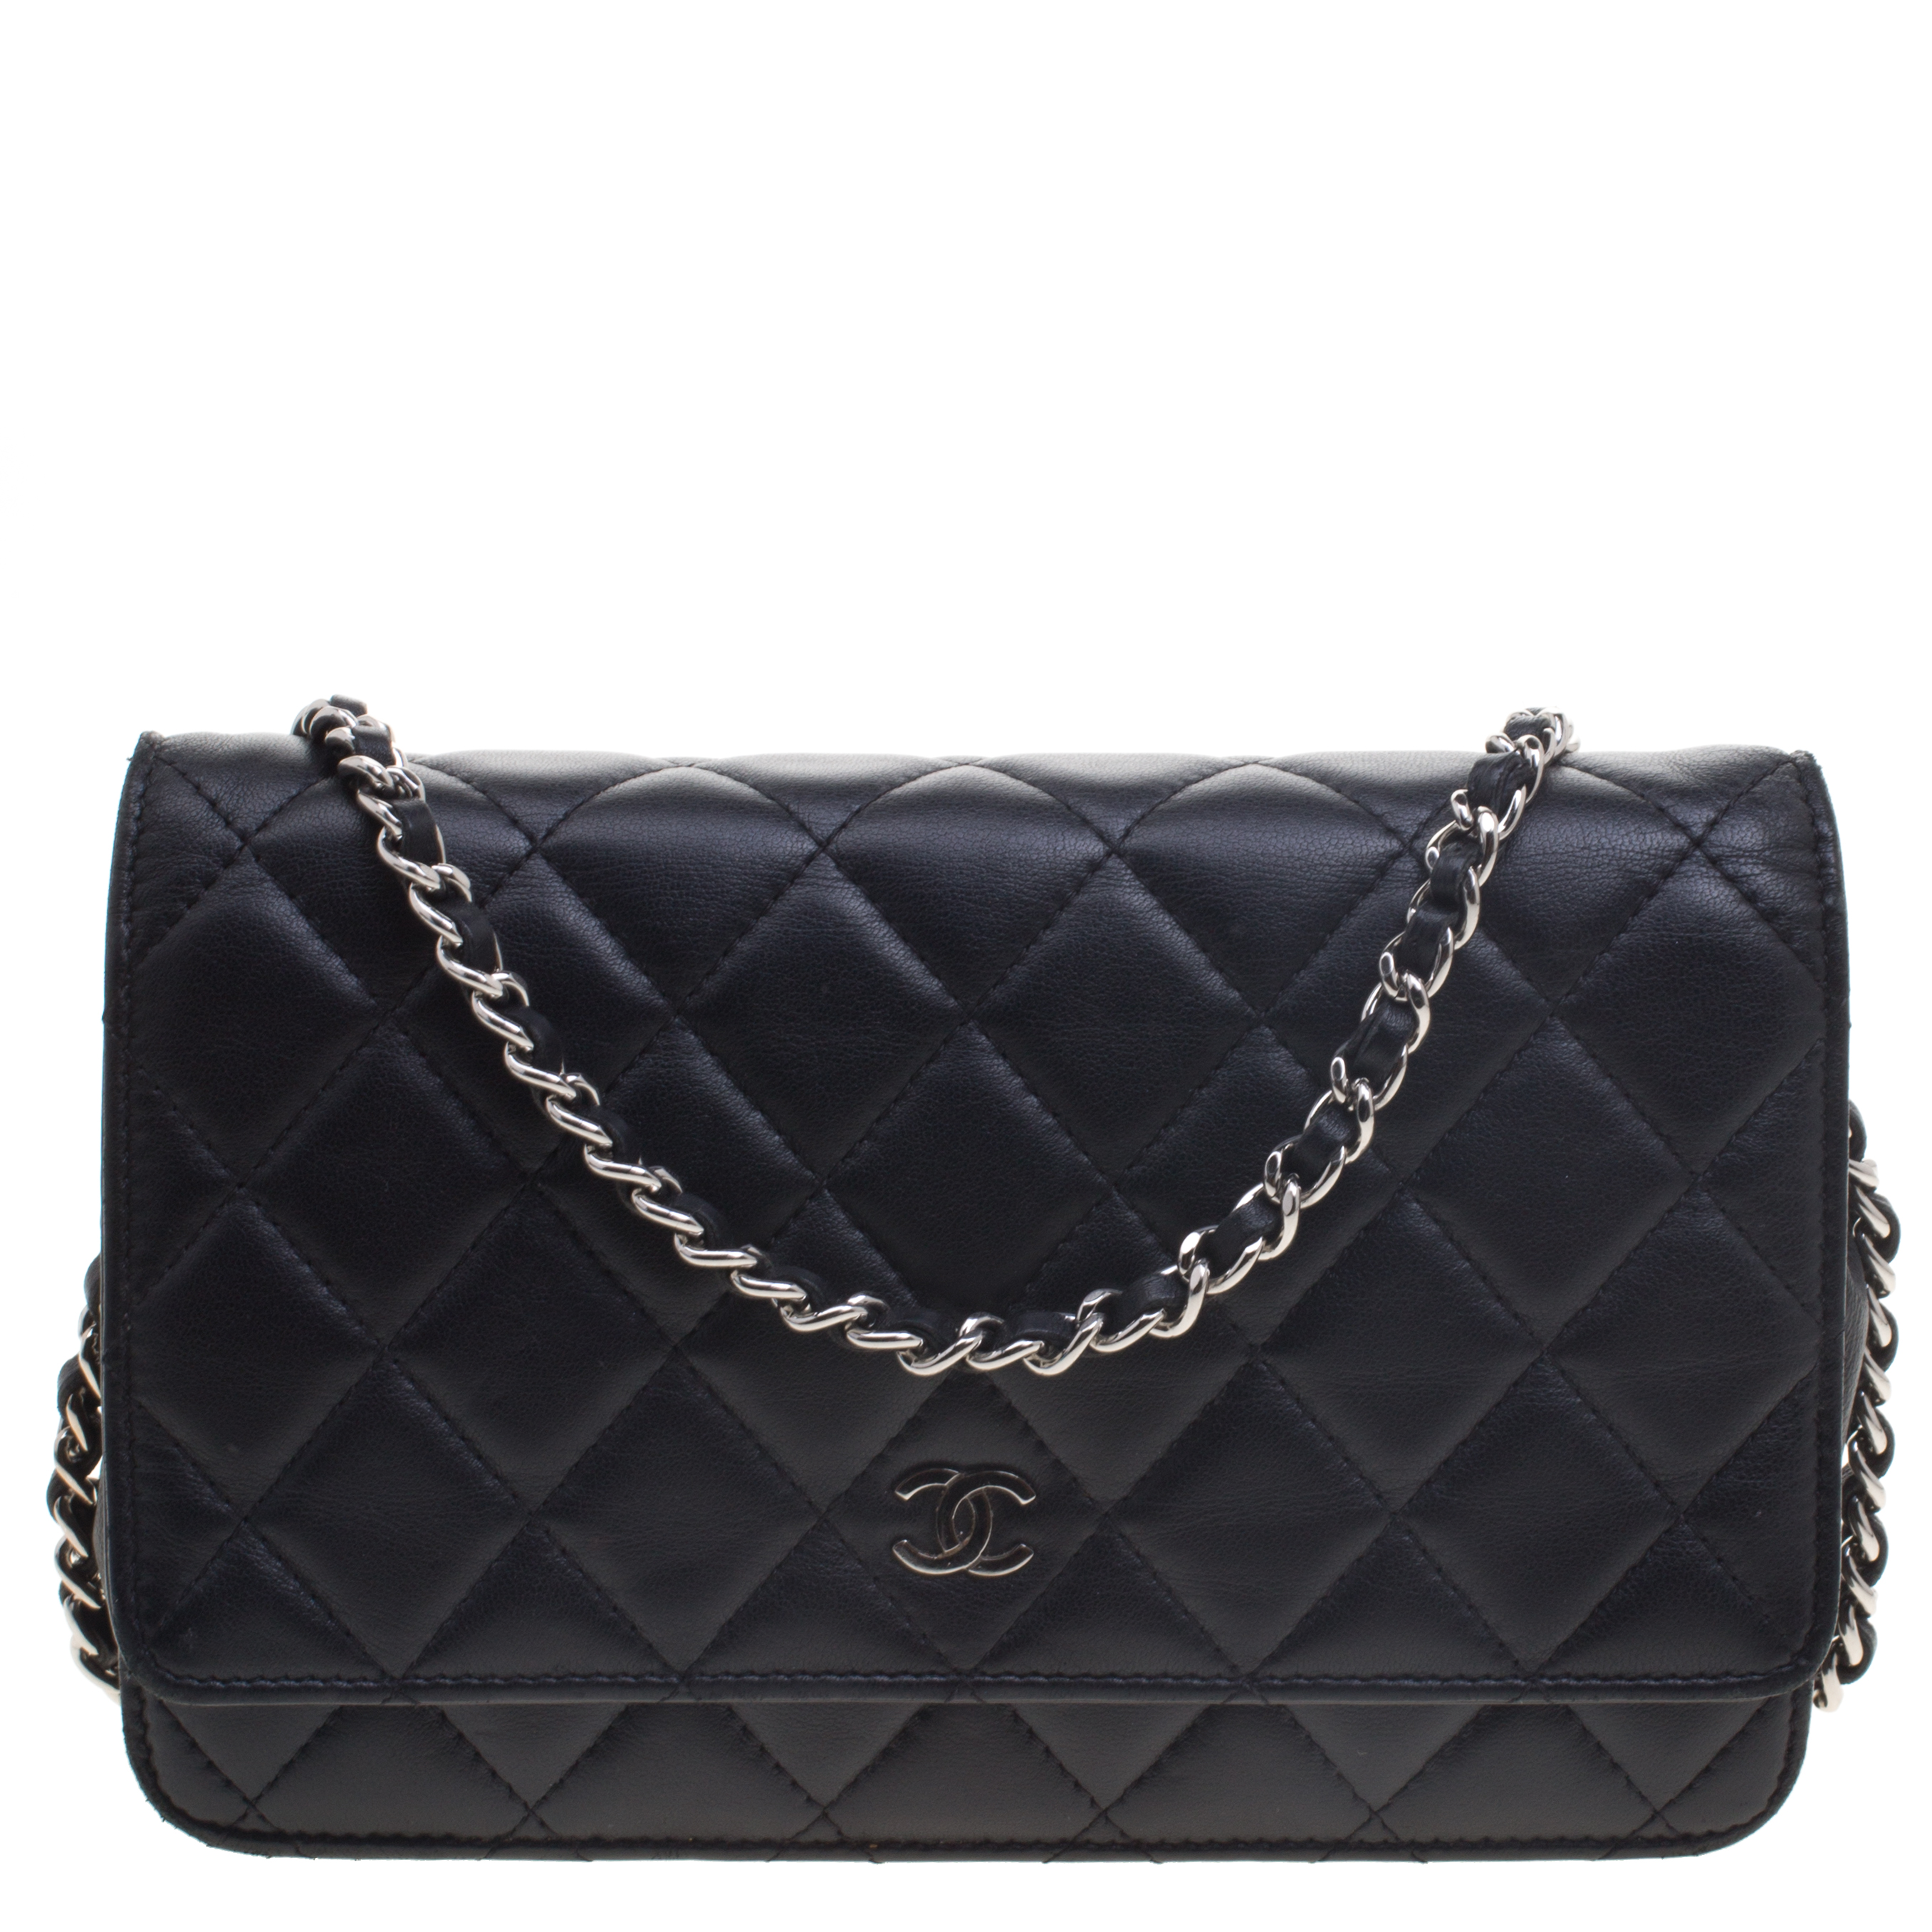 Chanel Black Quilted Leather Wallet On Chain